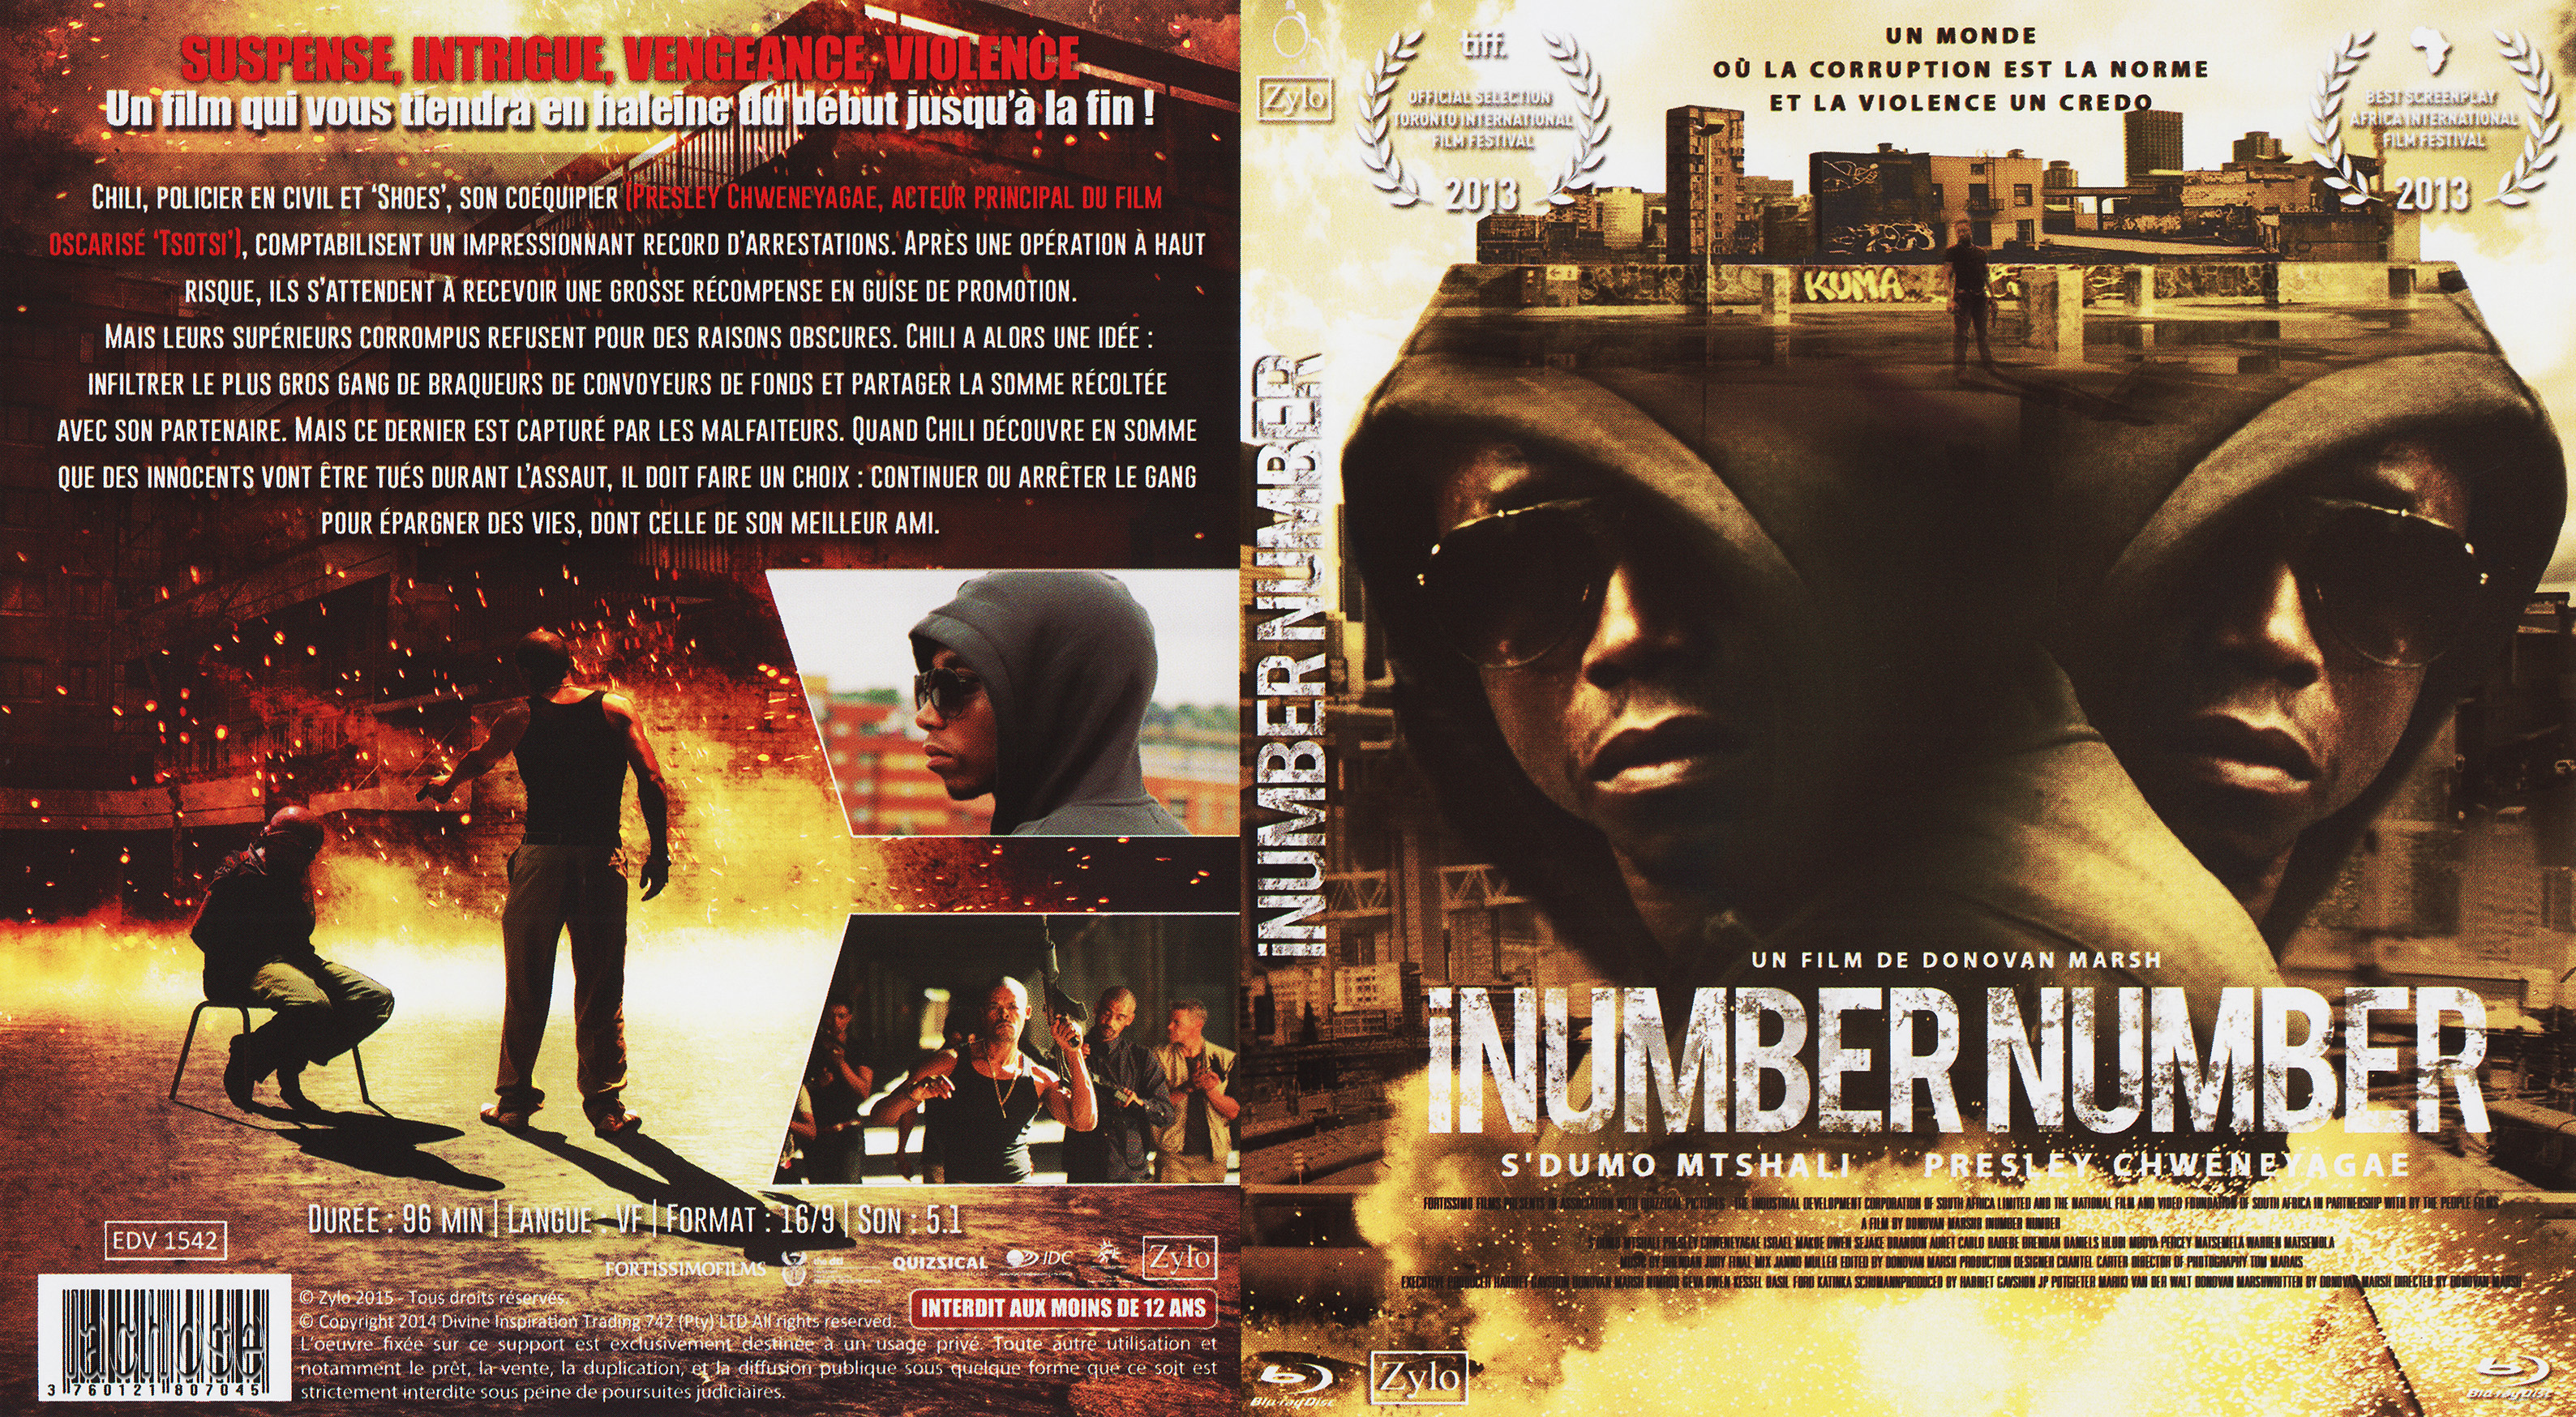 Jaquette DVD Inumber number (BLU-RAY)